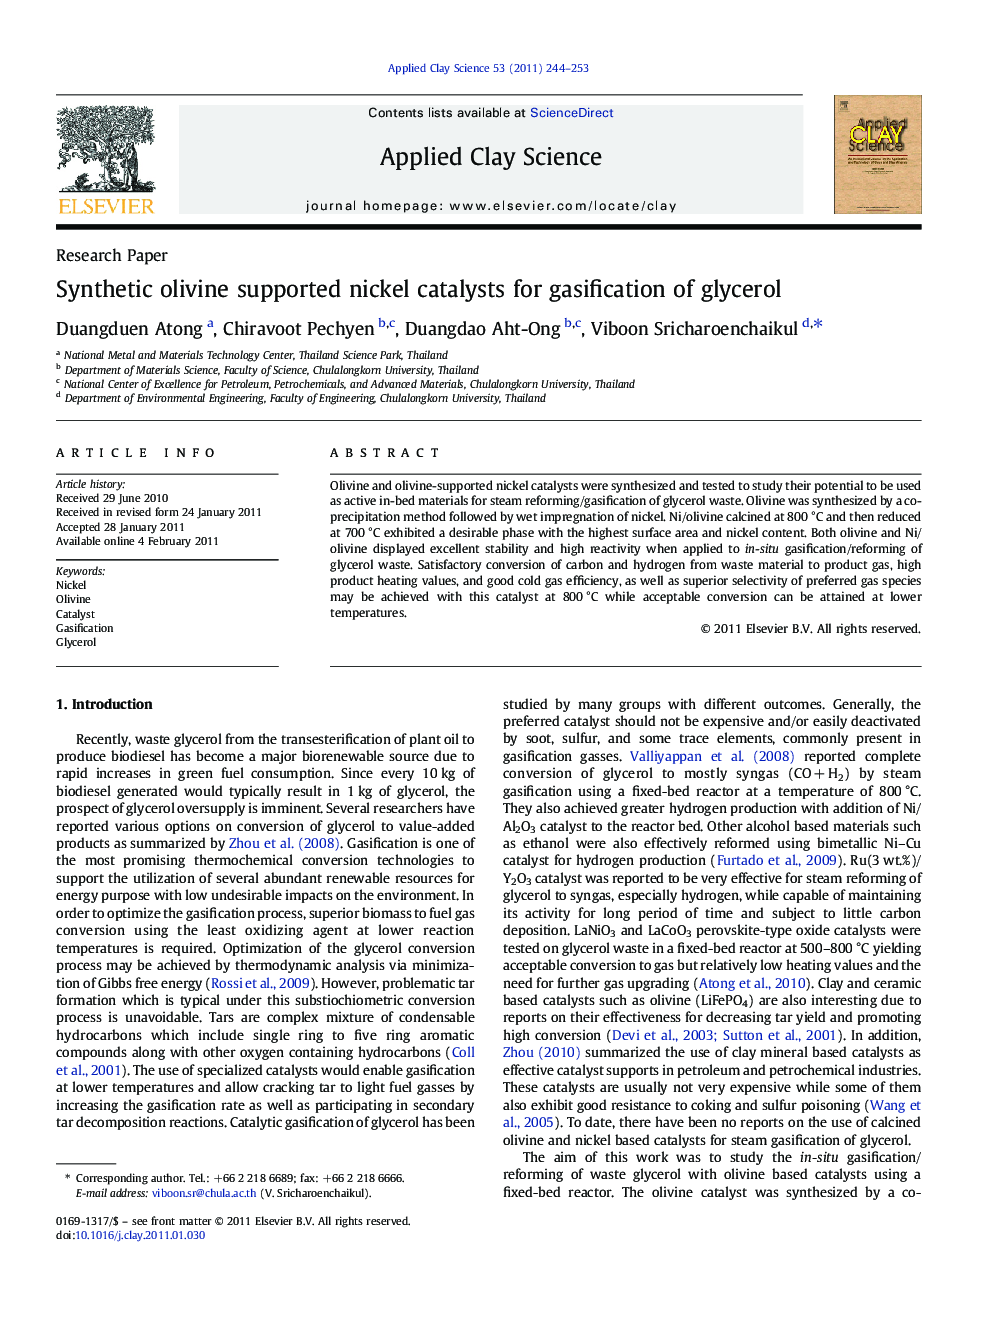 Synthetic olivine supported nickel catalysts for gasification of glycerol